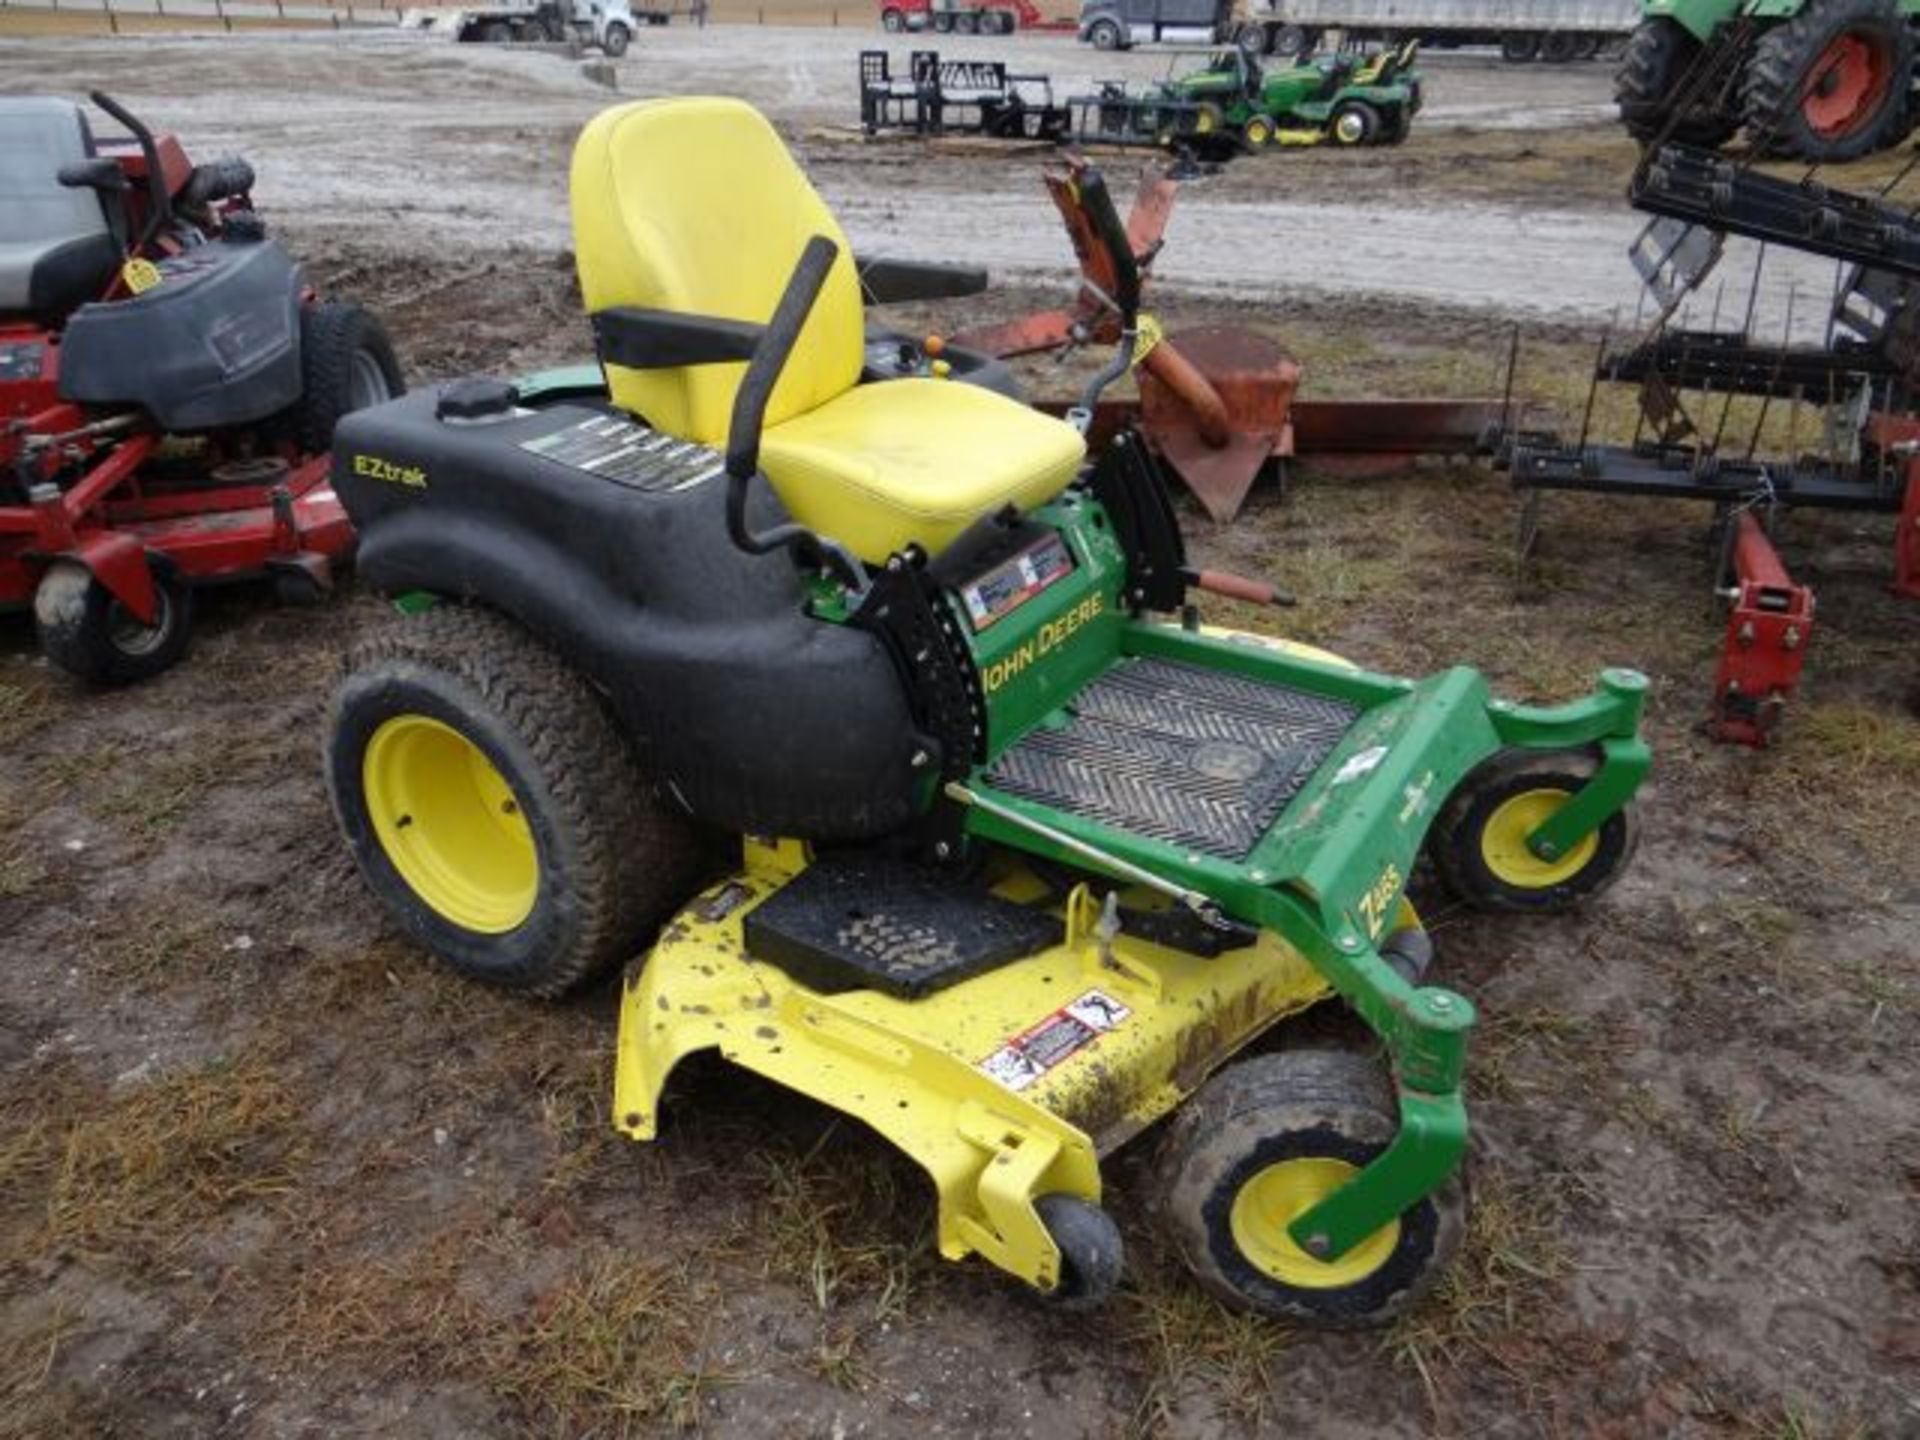 JD Z465 Riding Mower, 2010 #57582, 208 hrs, 62" Deck - Image 2 of 3